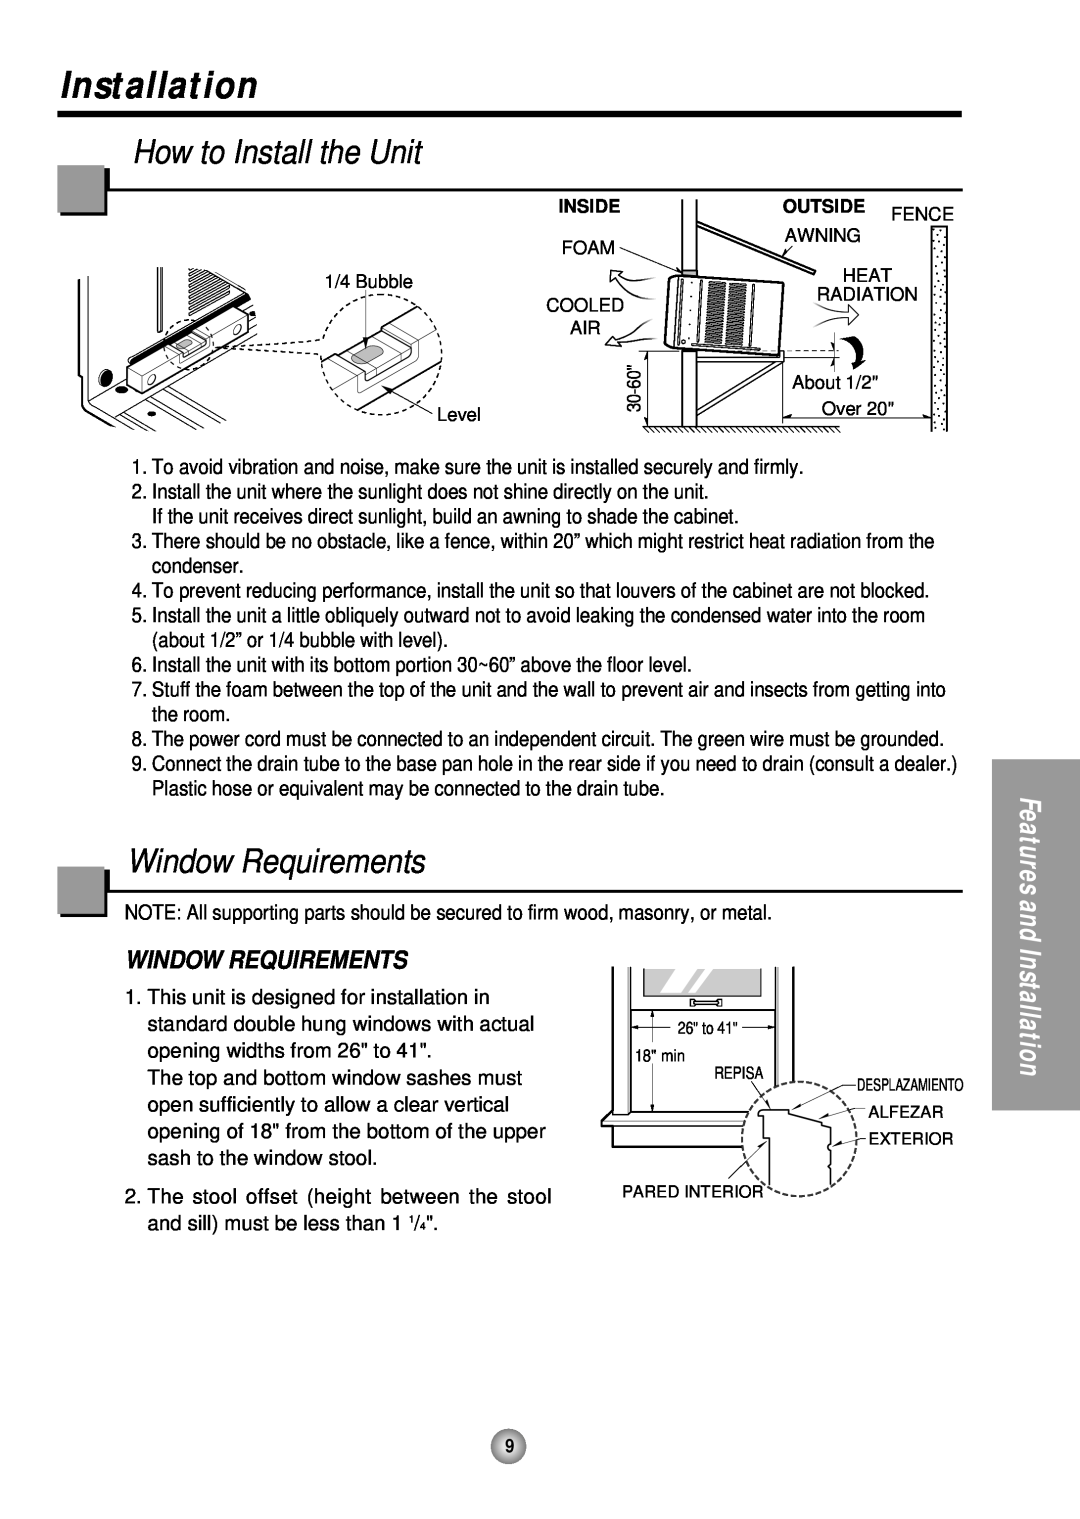 Panasonic HQ-2243TH manual Installation, How to Install the Unit, Window Requirements, Features and 